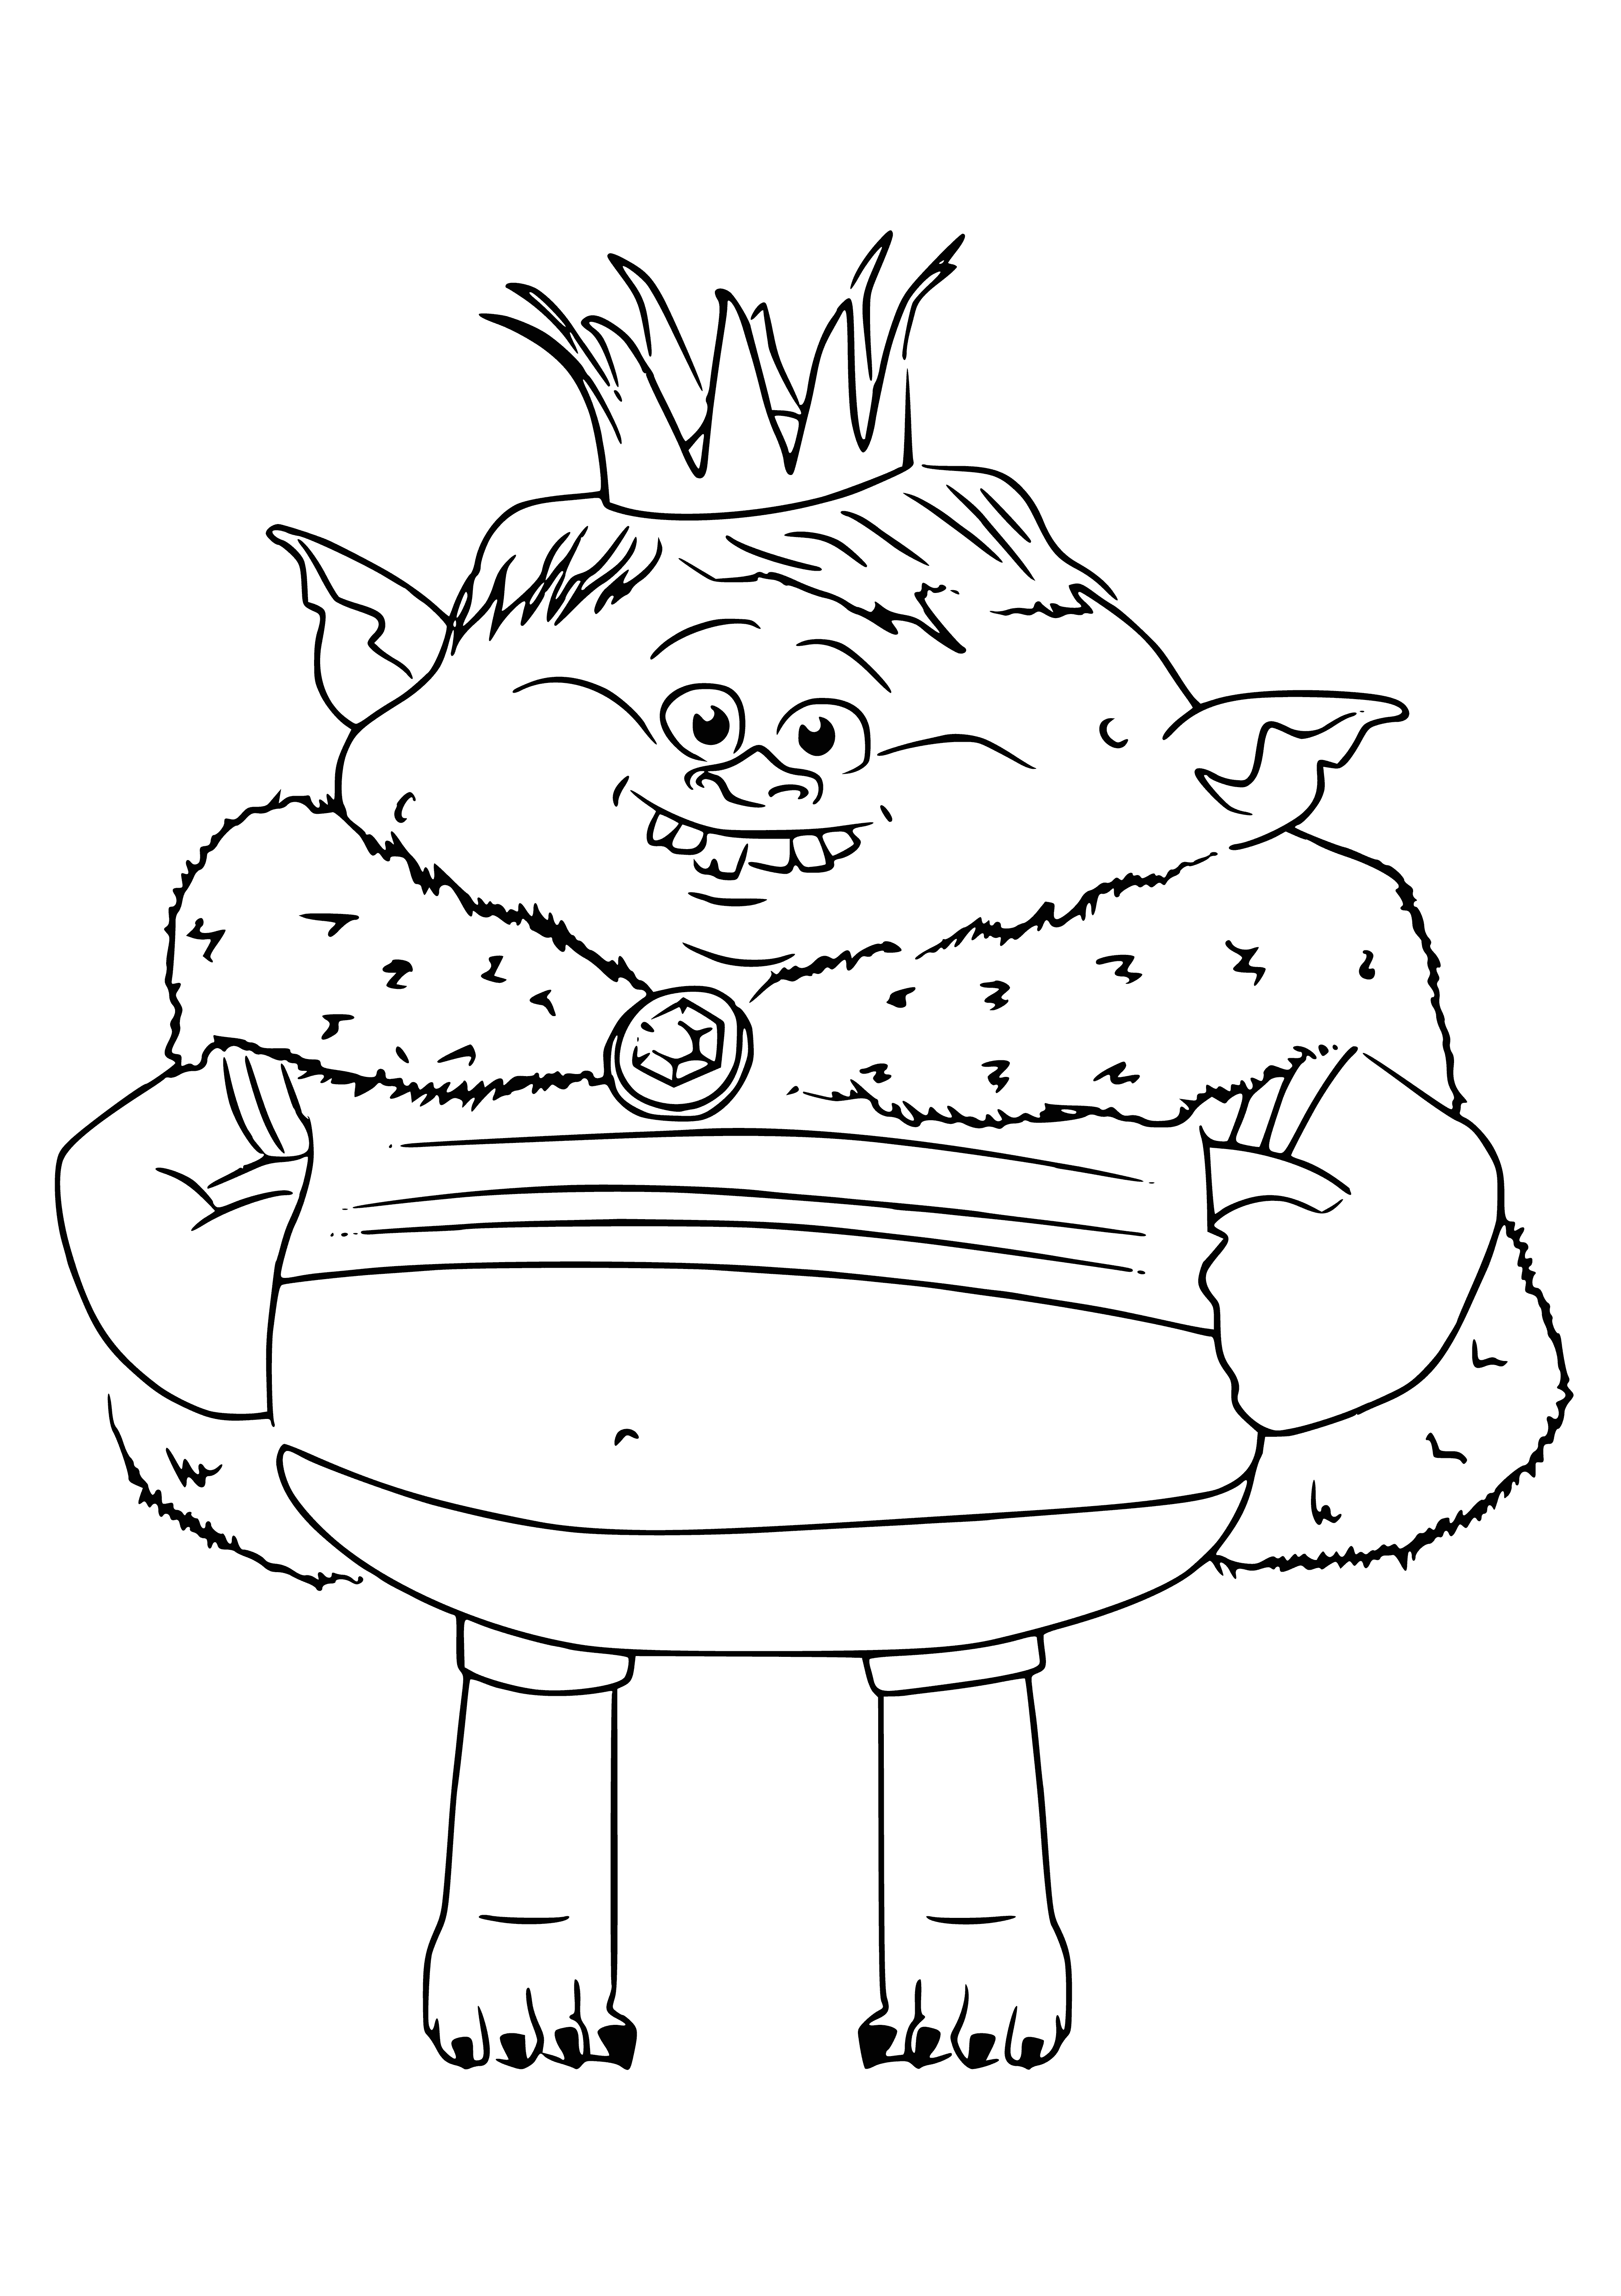 coloring page: King orange troll yells at scared smaller trolls of different colors. They raise their hands in fear. Eyes wide & wild, hair tangled.